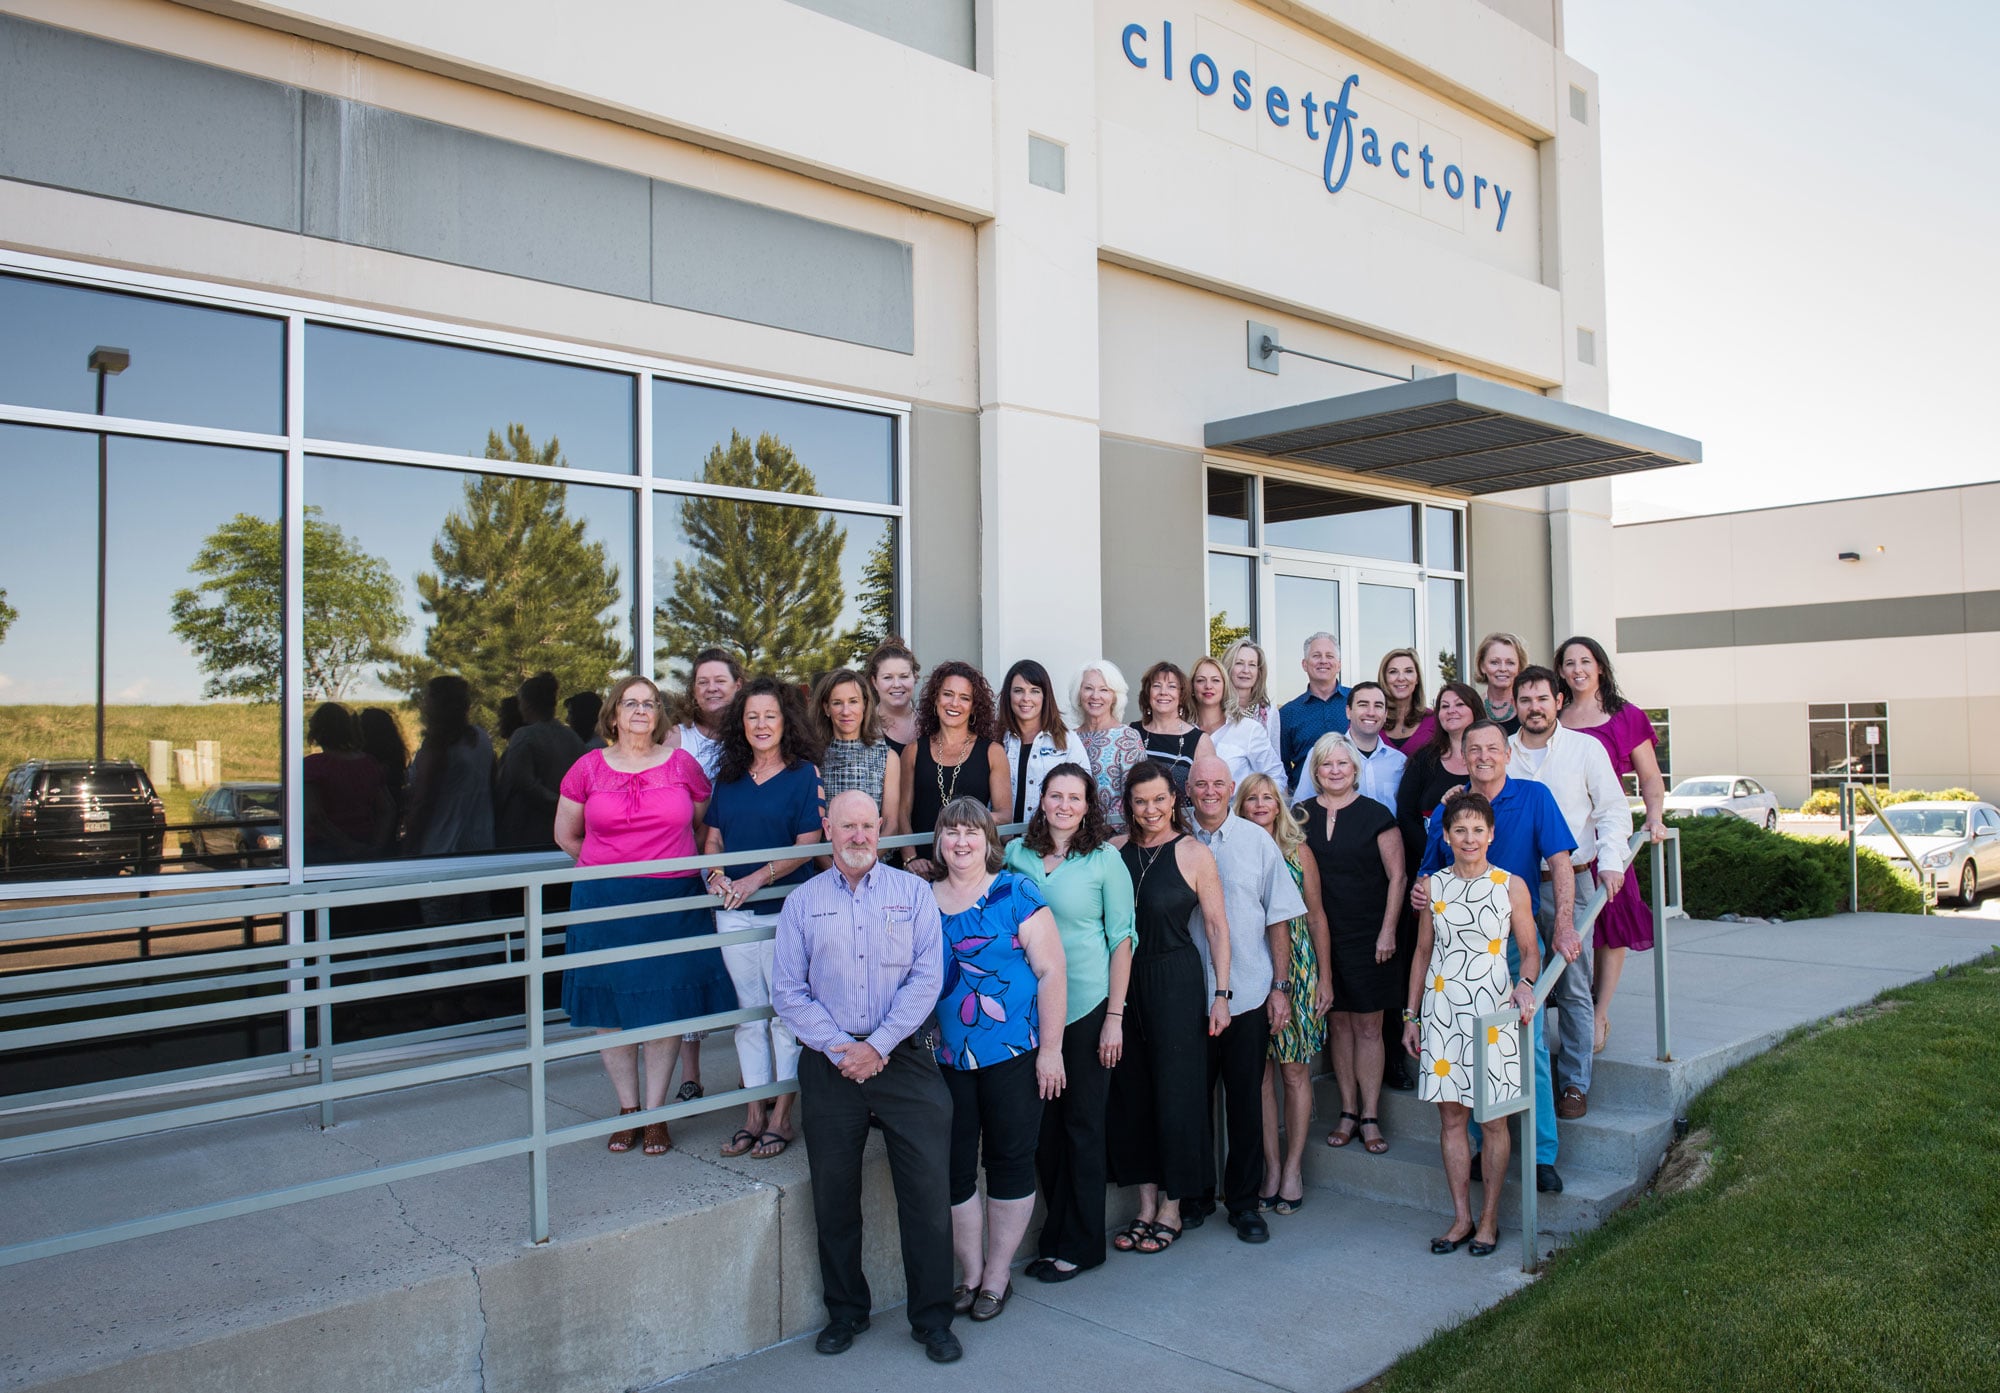 Colorado Closet Factory Building with staff in front